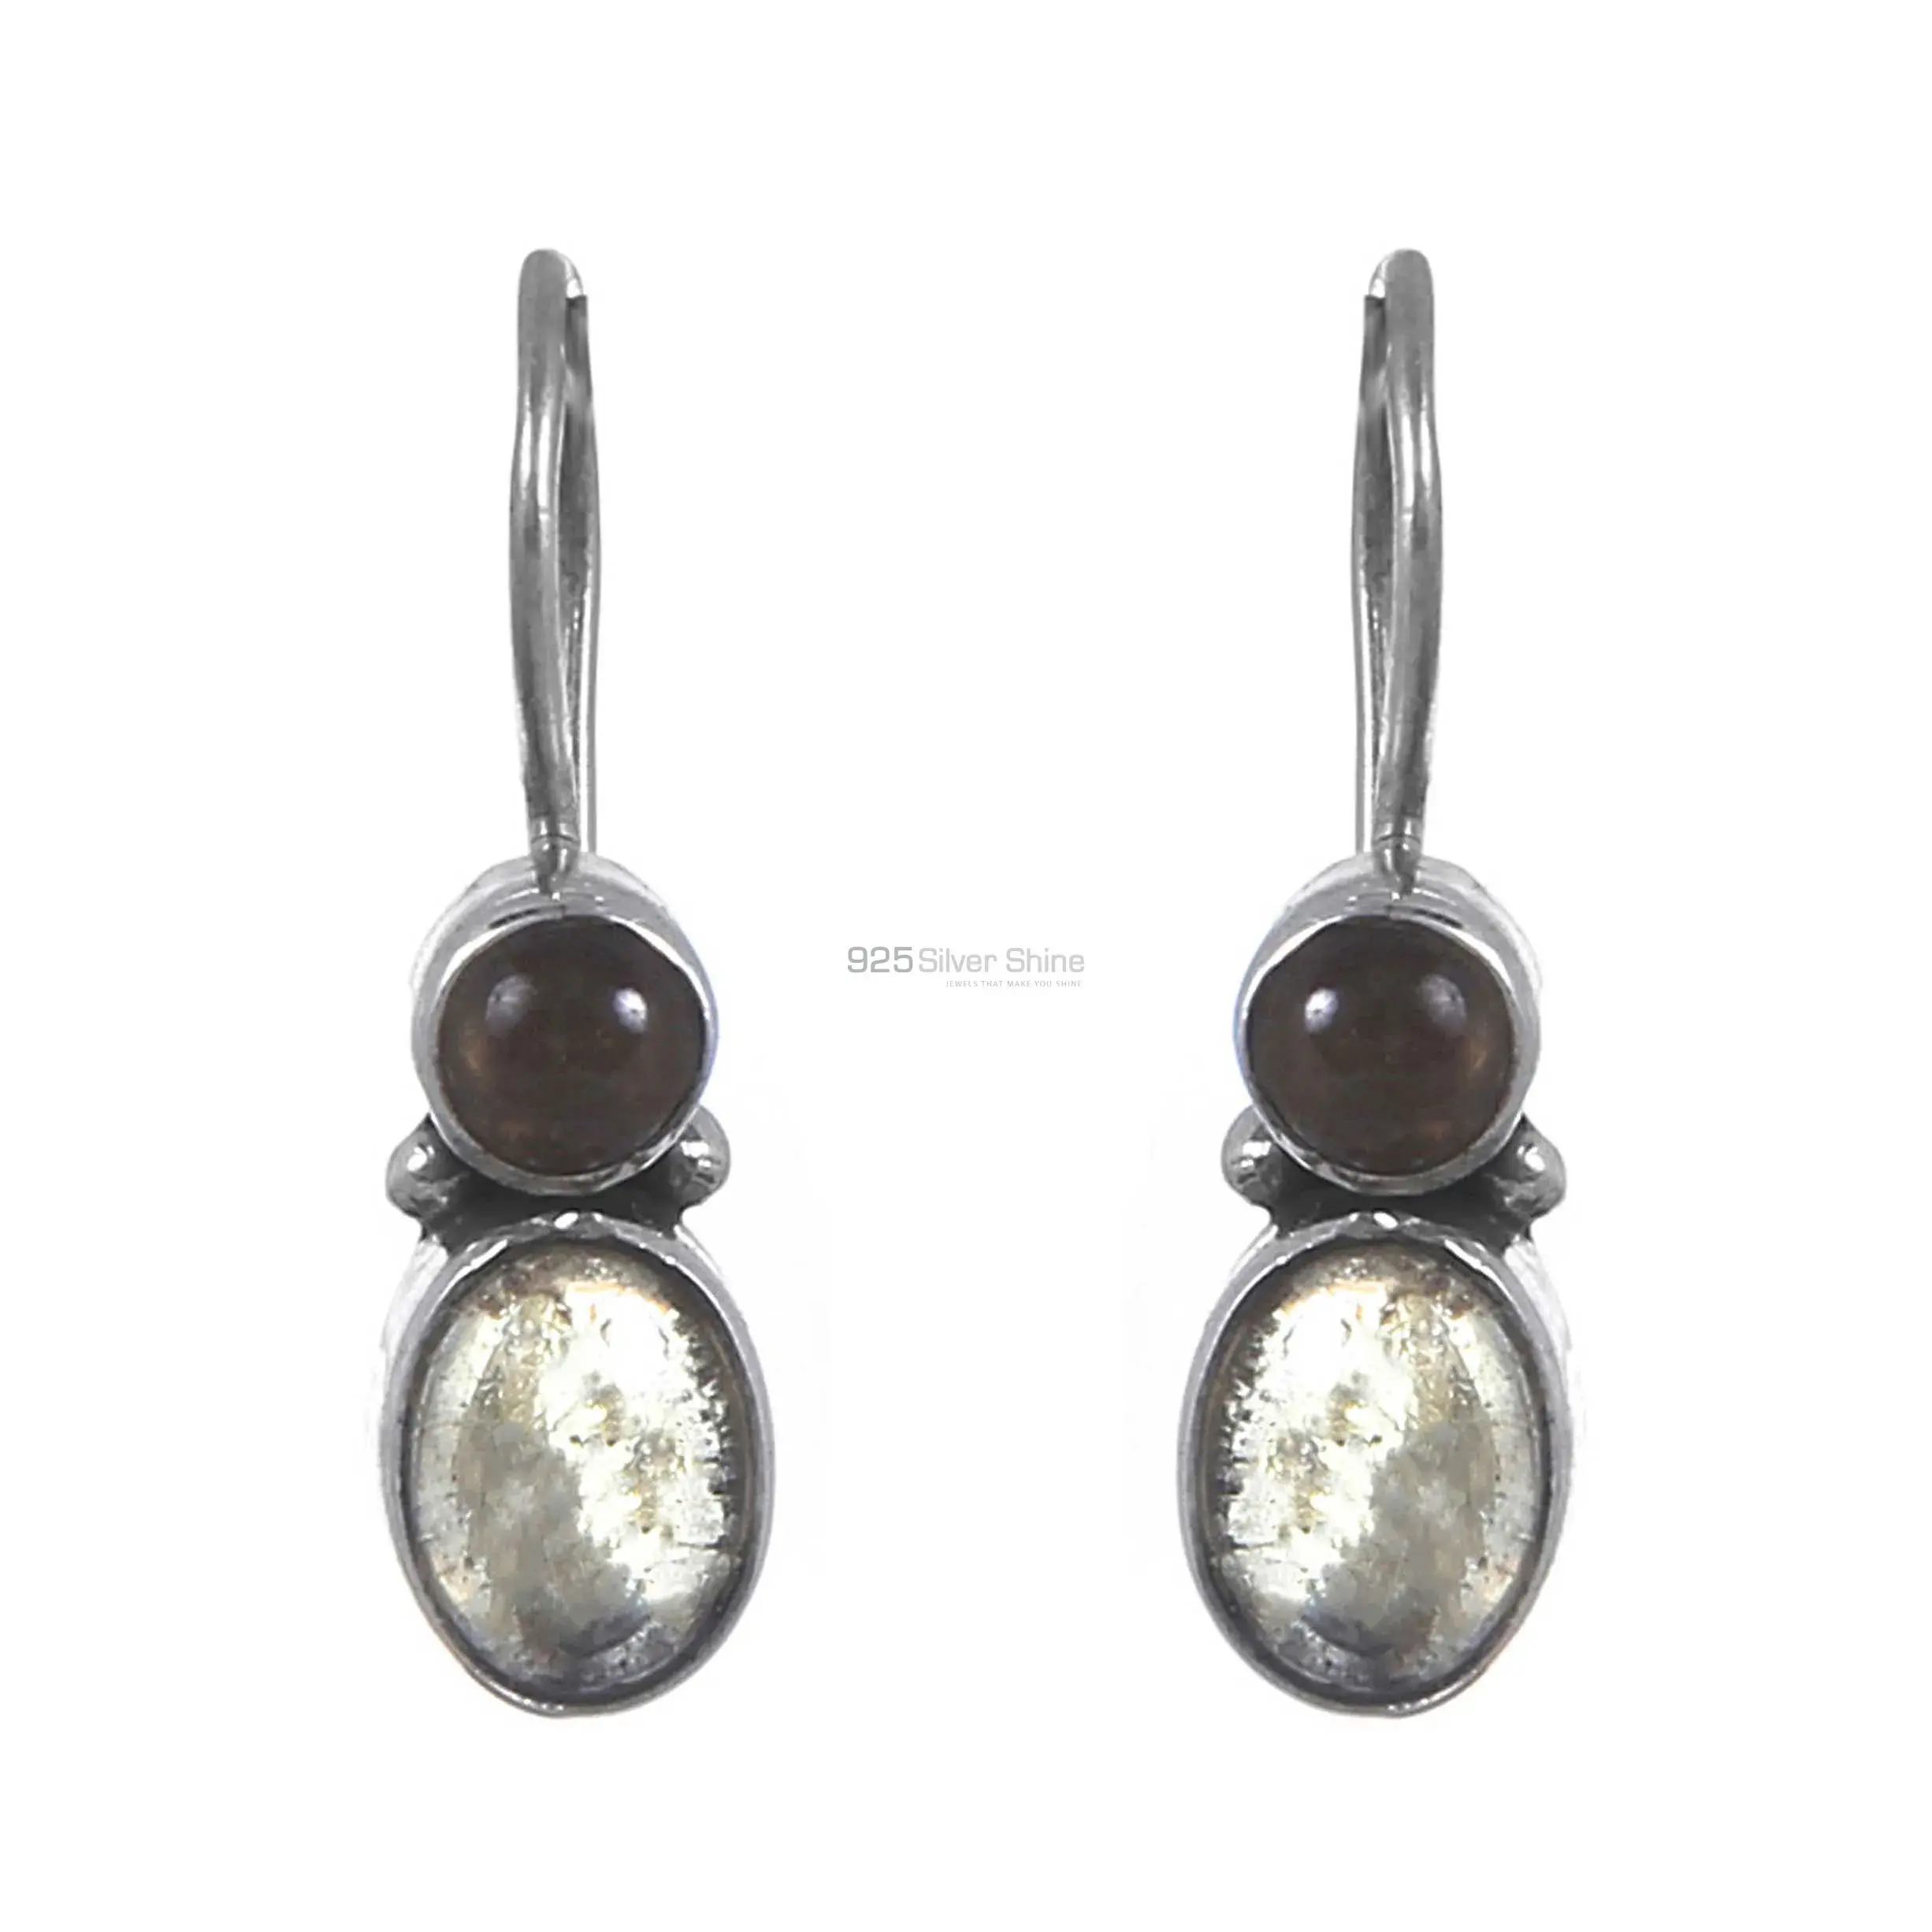 Solid 925 Silver Earrings In Natural Citrine Gemstone 925SE223